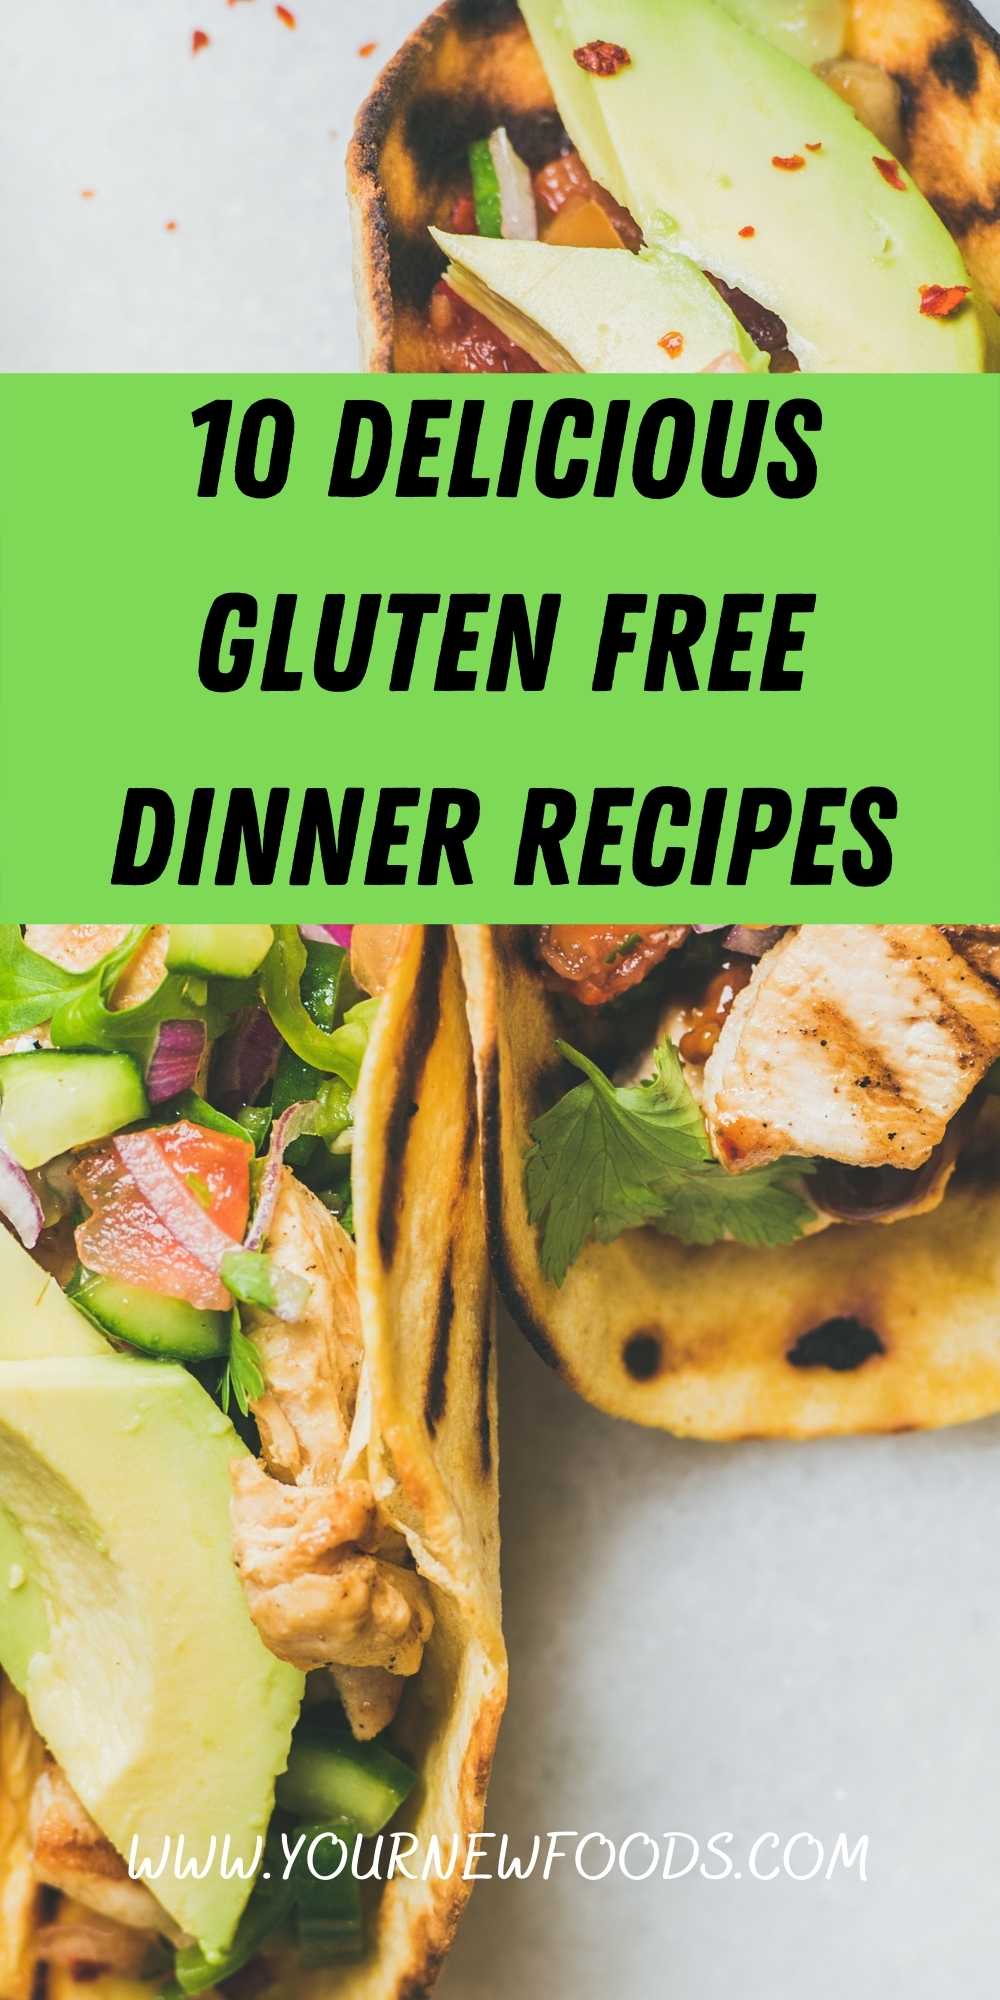 Gluten-free dinner recipes and meals - Your New Foods